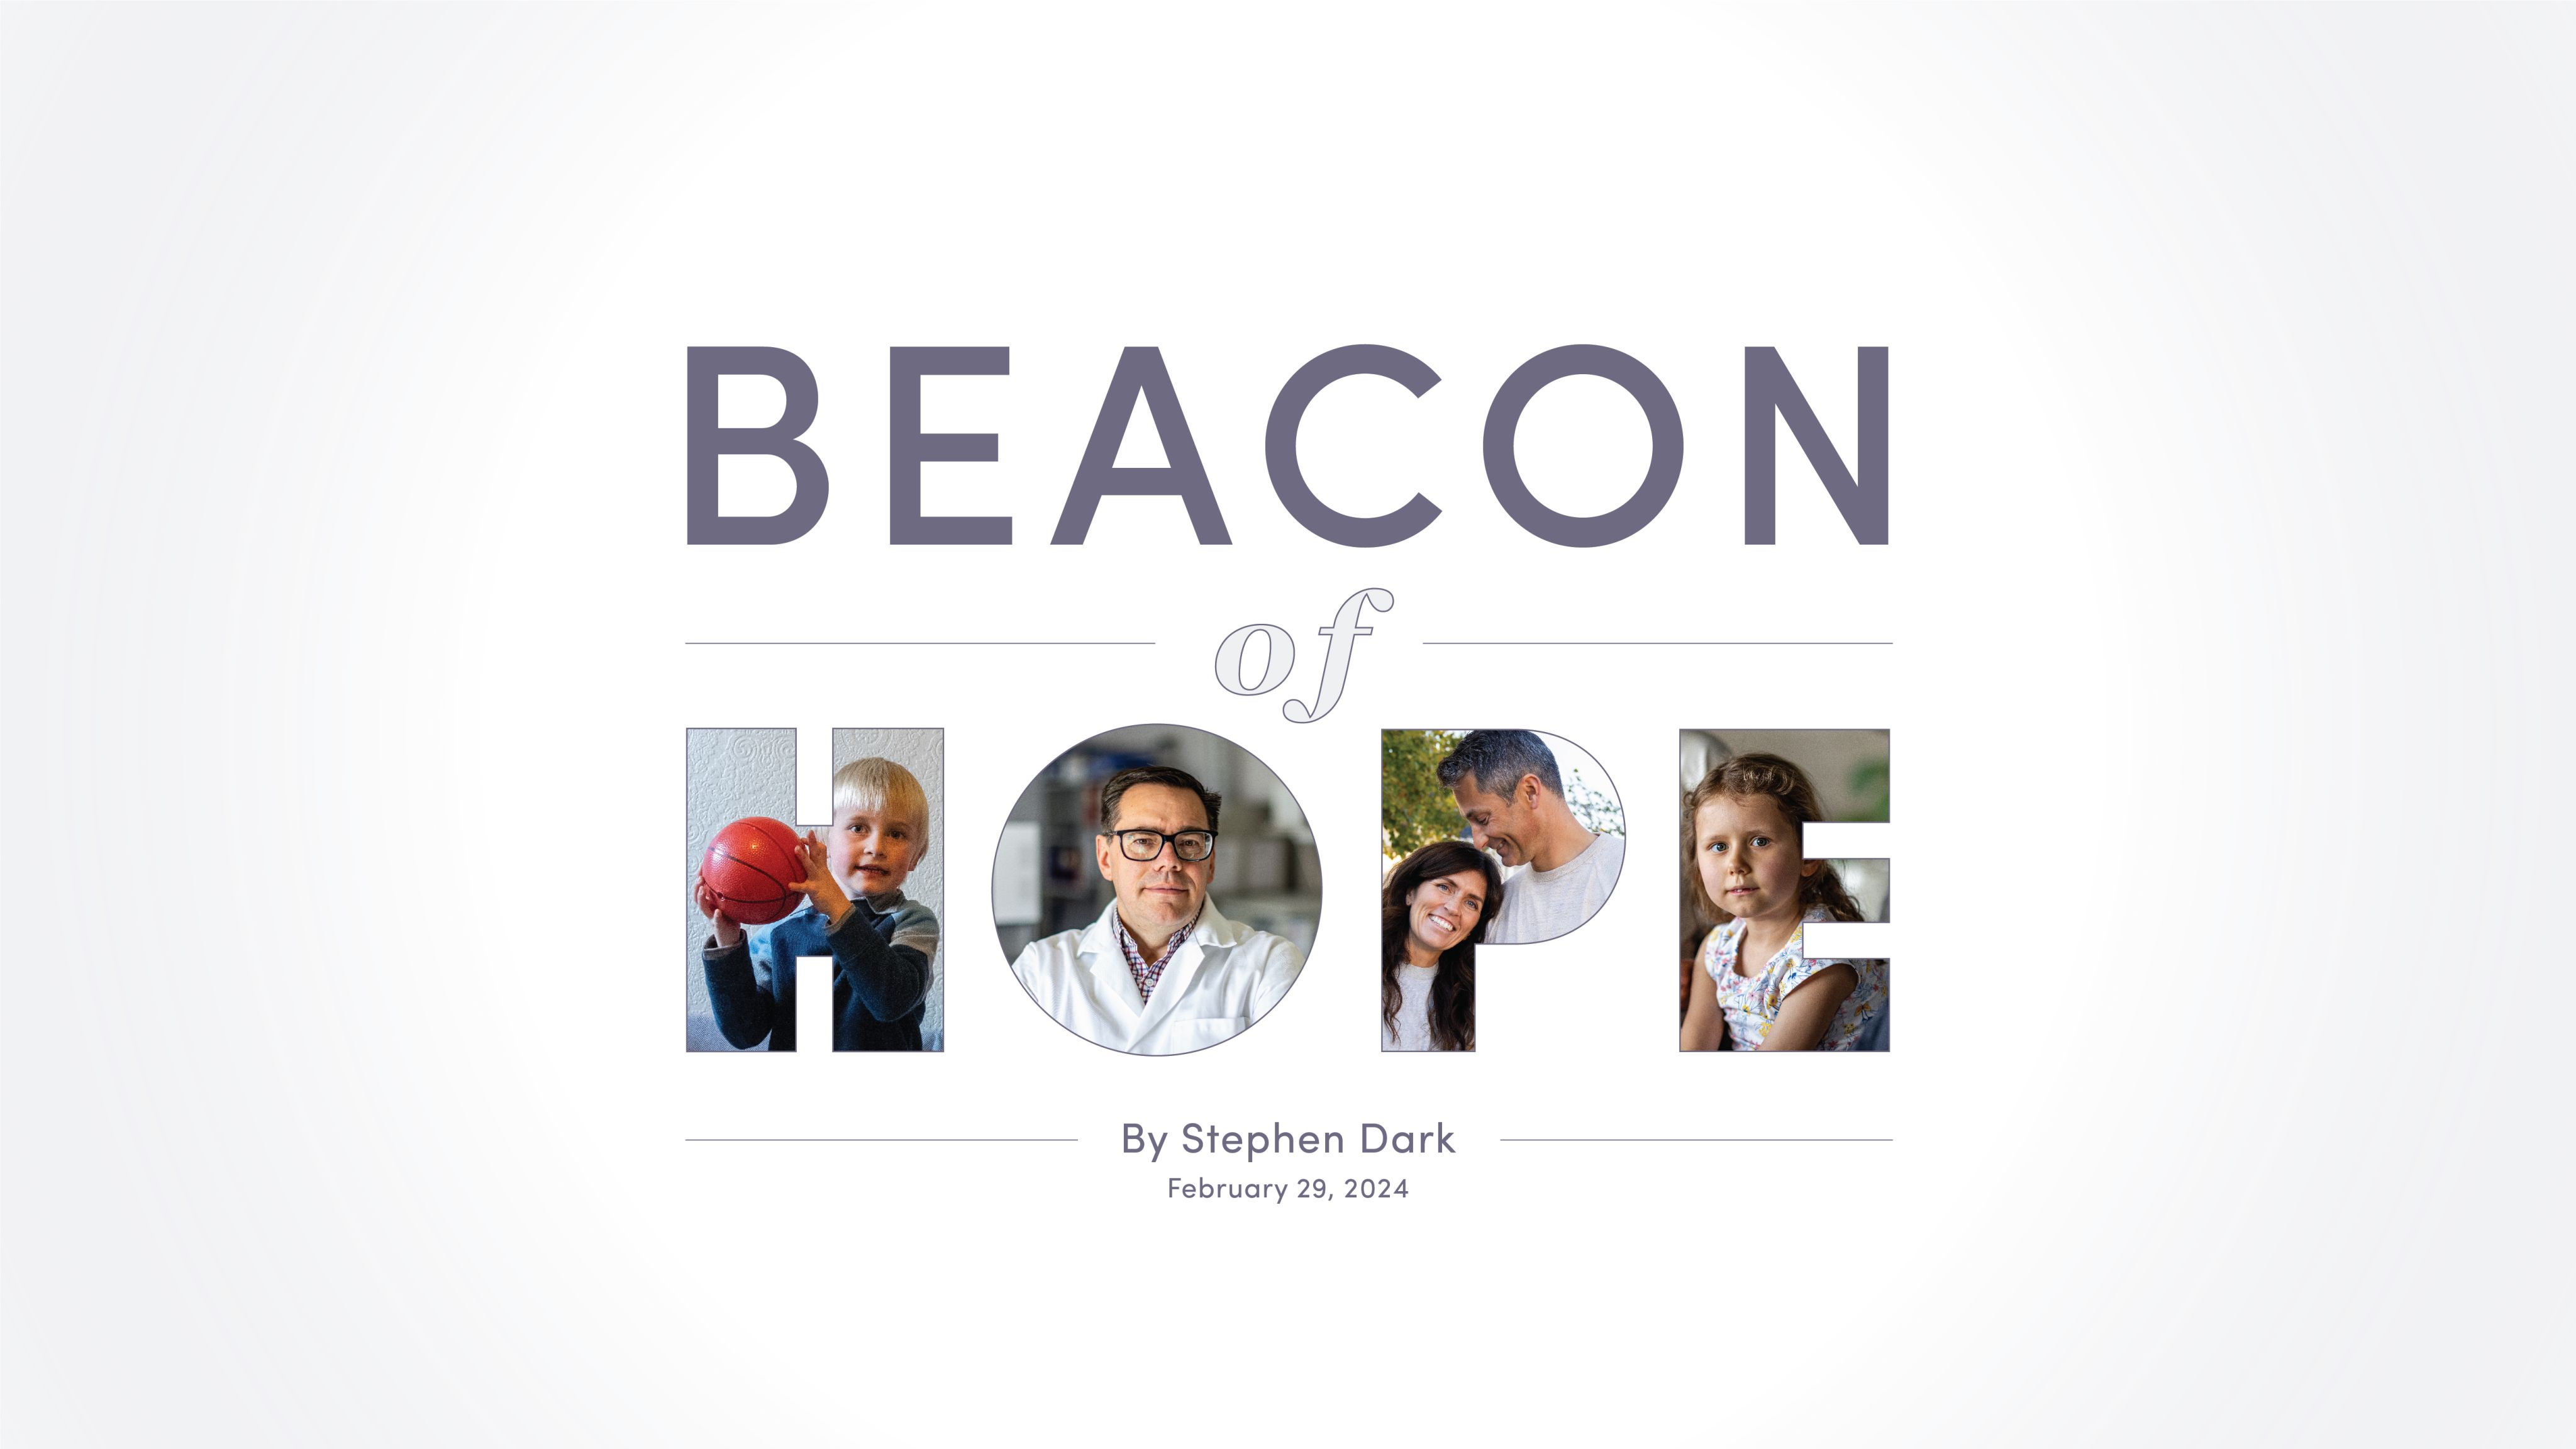 Title reads, "Beacon of Hope." The word "hope" has photos inside them of children (Cinch Wight and Evie Lewis), parents (Whit and Lindsay Coleman), and a physician-scientist (Russell Butterfield, MD, PhD).